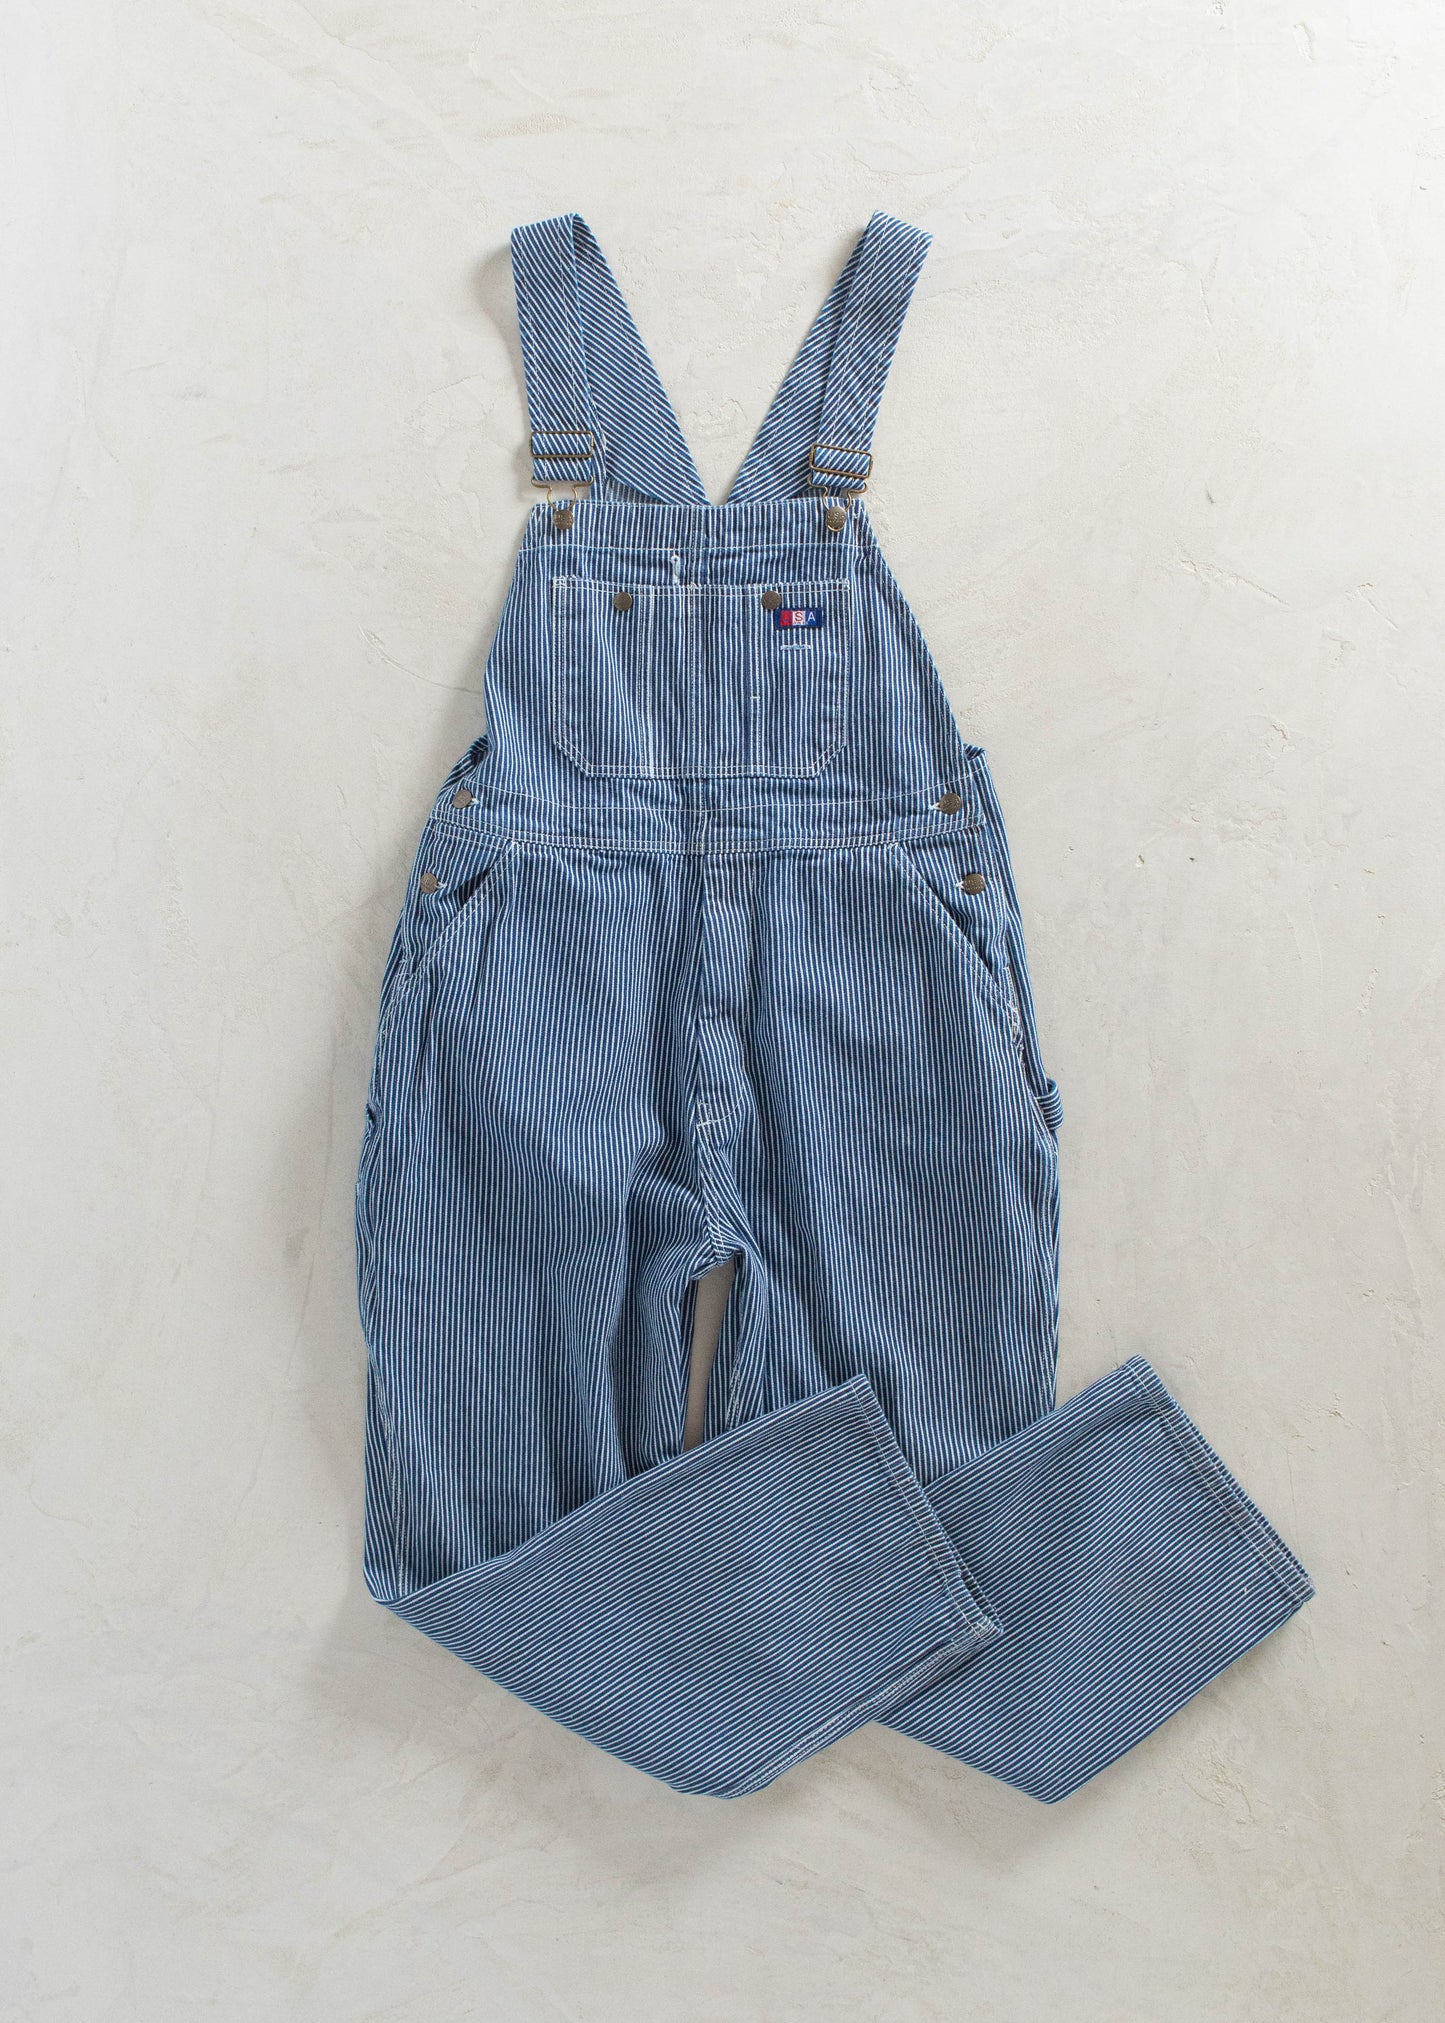 1980s USA Works Deadstock Hickory Stripes Overalls Size L/XL